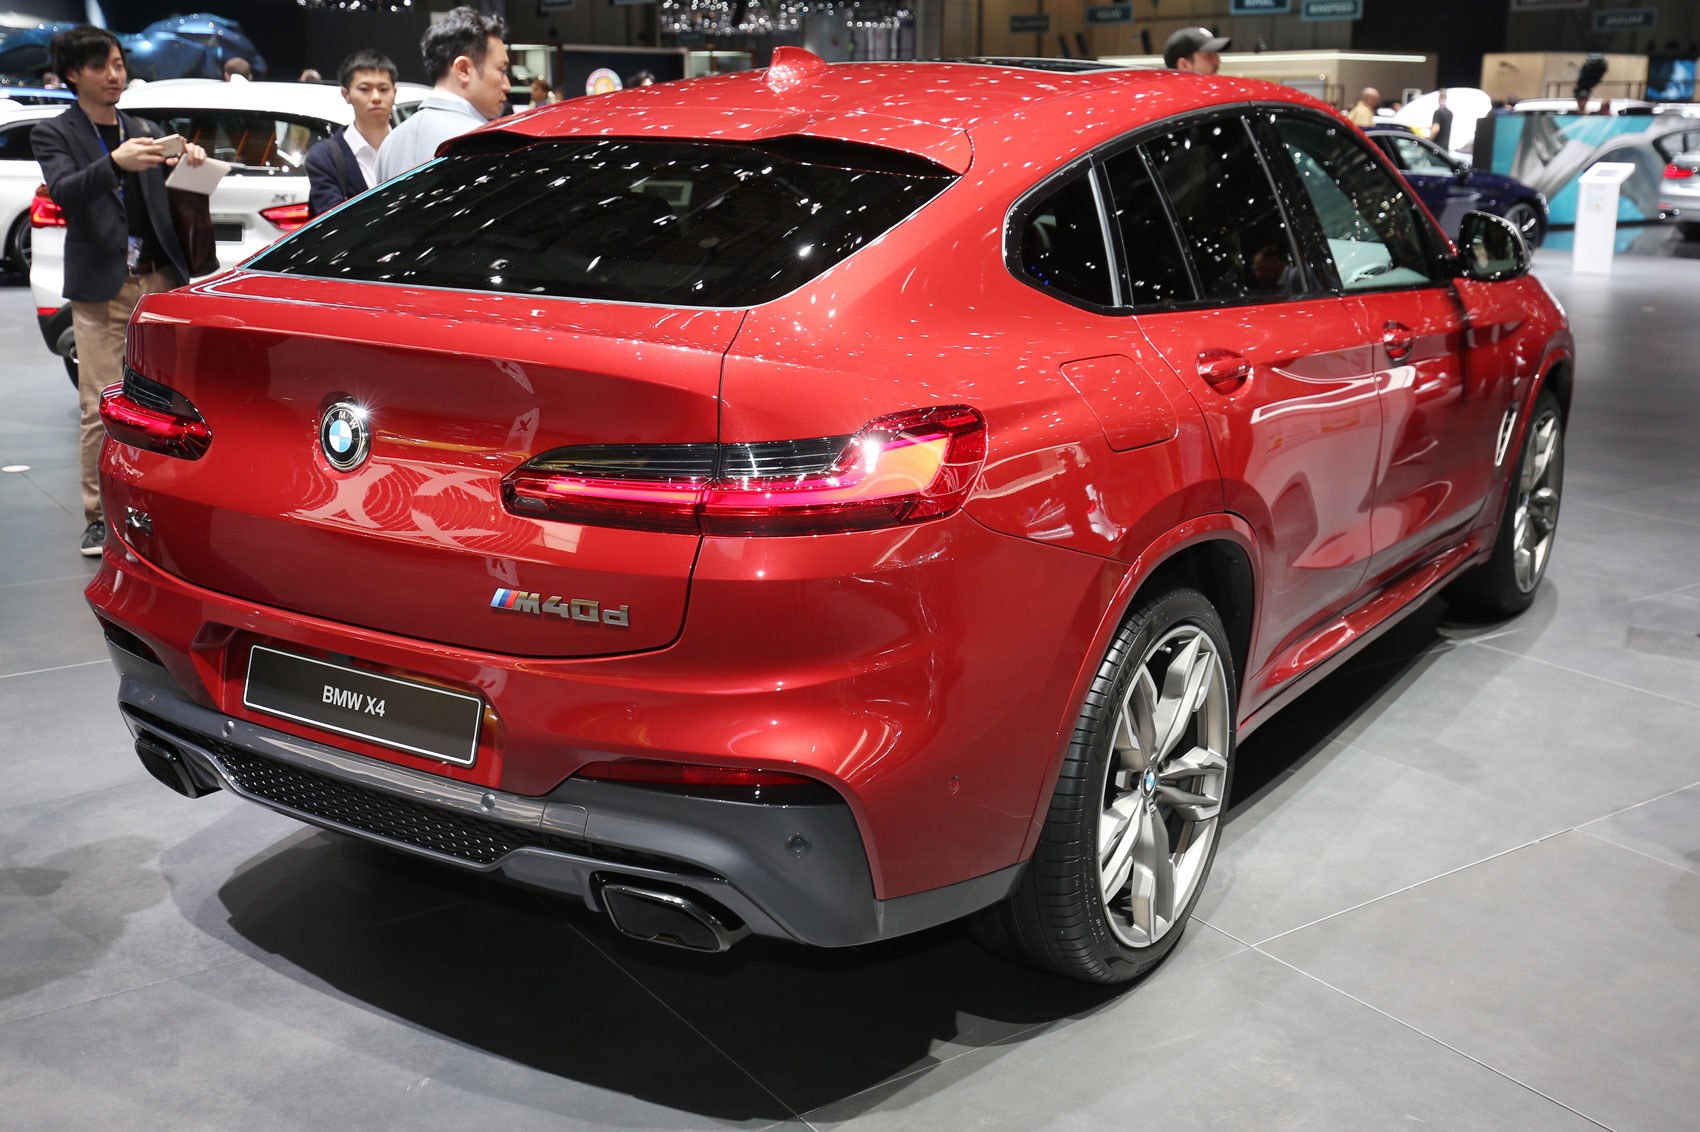 Generation X hot BMW X4 M40i coming to New York show